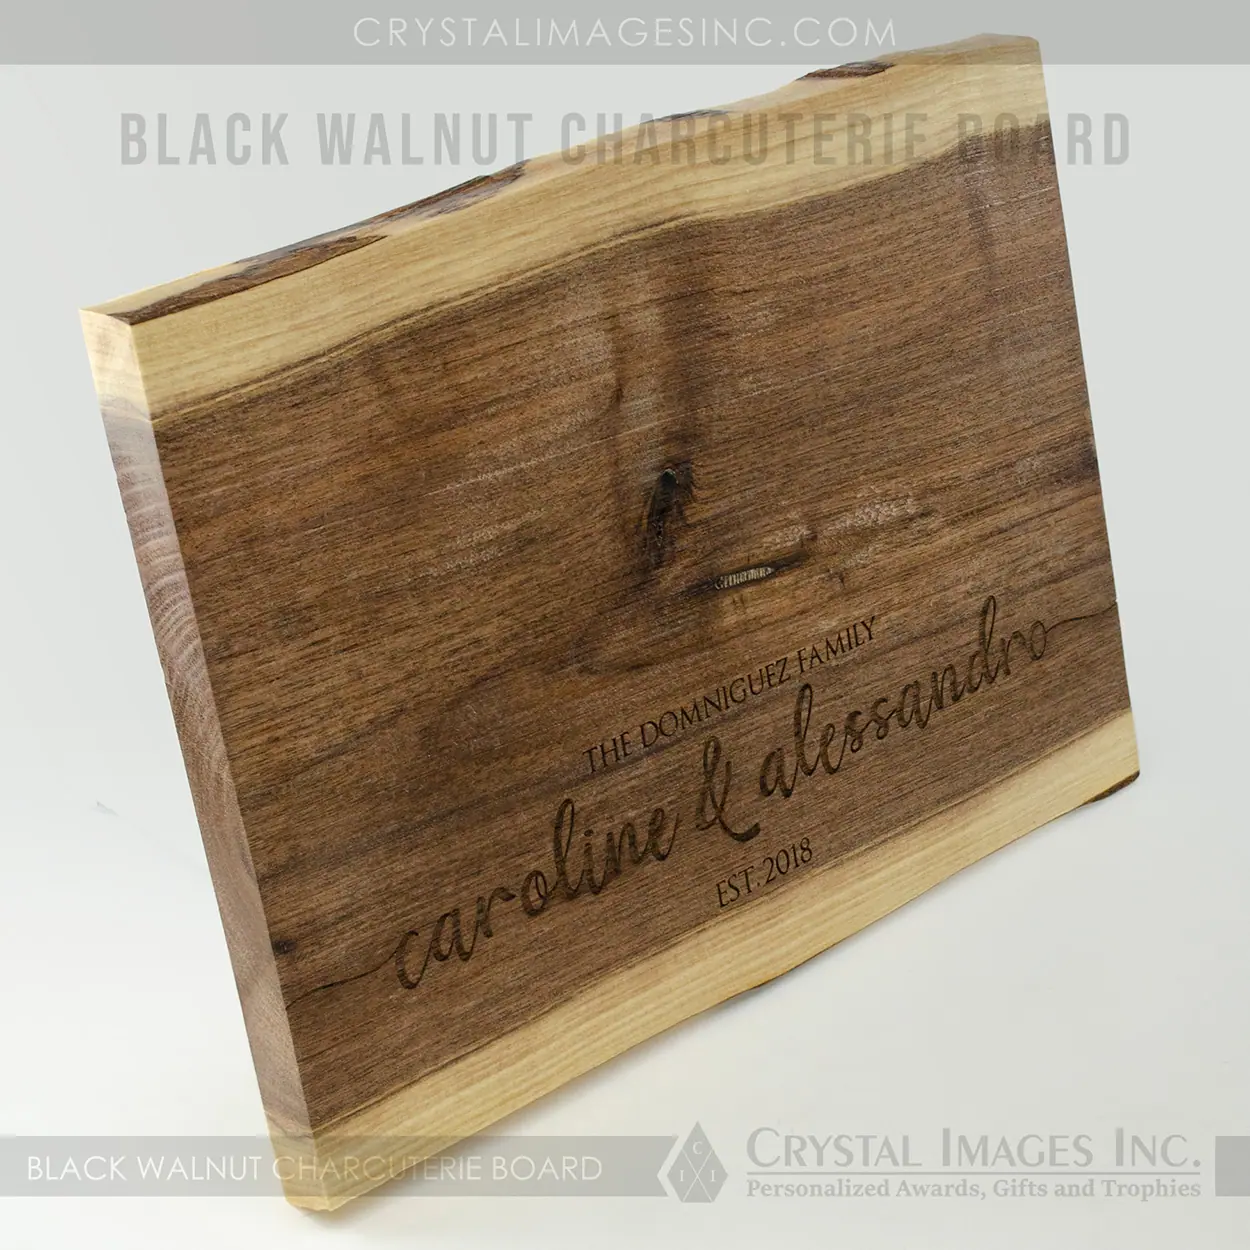 Black Walnut Footed Cutting Board - Personalized Kitchen 5th anniversary  Gift - Serving Board - Organic Live Edge Wood Cutting Board 786 —  Rusticcraft Designs